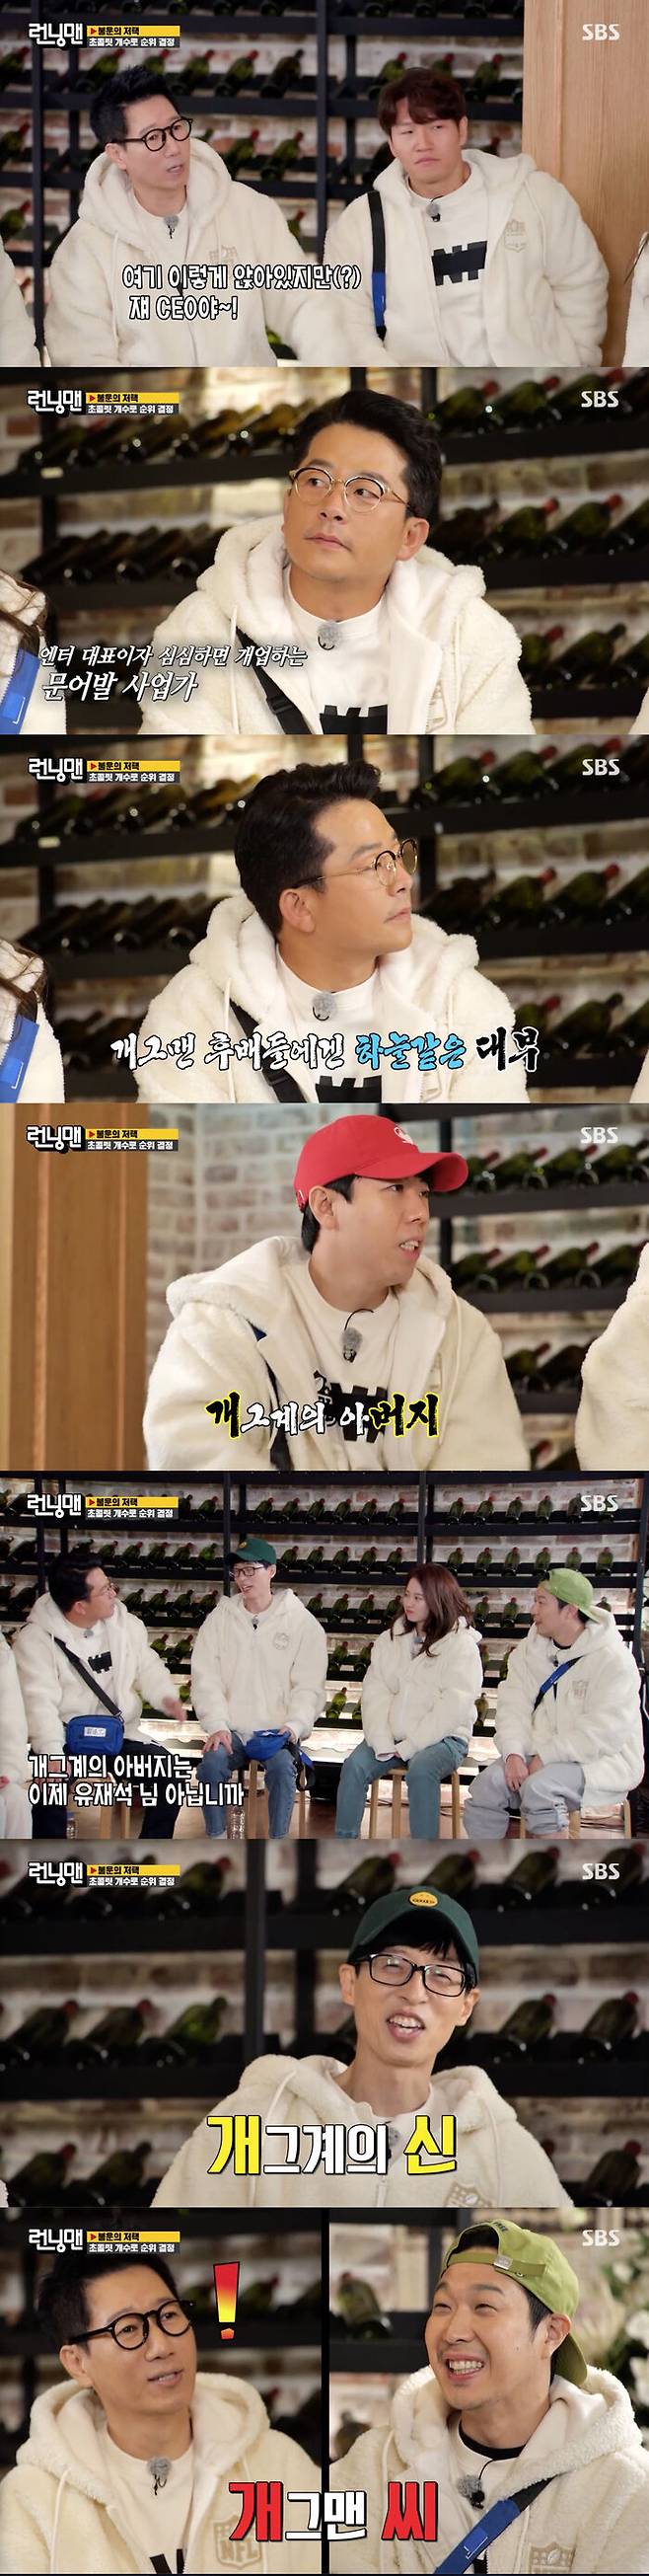 Gabbersey Kim Jun-ho appeared as a solo guest.On SBS Running Man broadcasted on the 31st, Kim Jun-ho, king of Bad Luck, appeared as a guest and performed Bad Lucks Mansion Race.On the day of the broadcast, Ji Suk-jin told Kim Jun-ho, He is CEO even if he looks like that.The members added, The comedian juniors die, The Godfather, The Godfather.Yang Se-chan then said, Its a dogburge. So Ji Suk-jin laughed because he did not understand it properly, saying, Dog? Dogs?Its not that, its the gag father, Gabbage, Yang Se-chan explained to the stuffy Ji Suk-jin.Thats a bit embarrassing, Kim Jun-ho said of the gabji modifier, and now Yoo Jae-Suk is a gab. Haha said, Jaseok is a Protestant.God of the gag world; he also gave Ji Suk-jin a laugh by dropping a nuisance, saying, My brother is a dog, just a comedian.